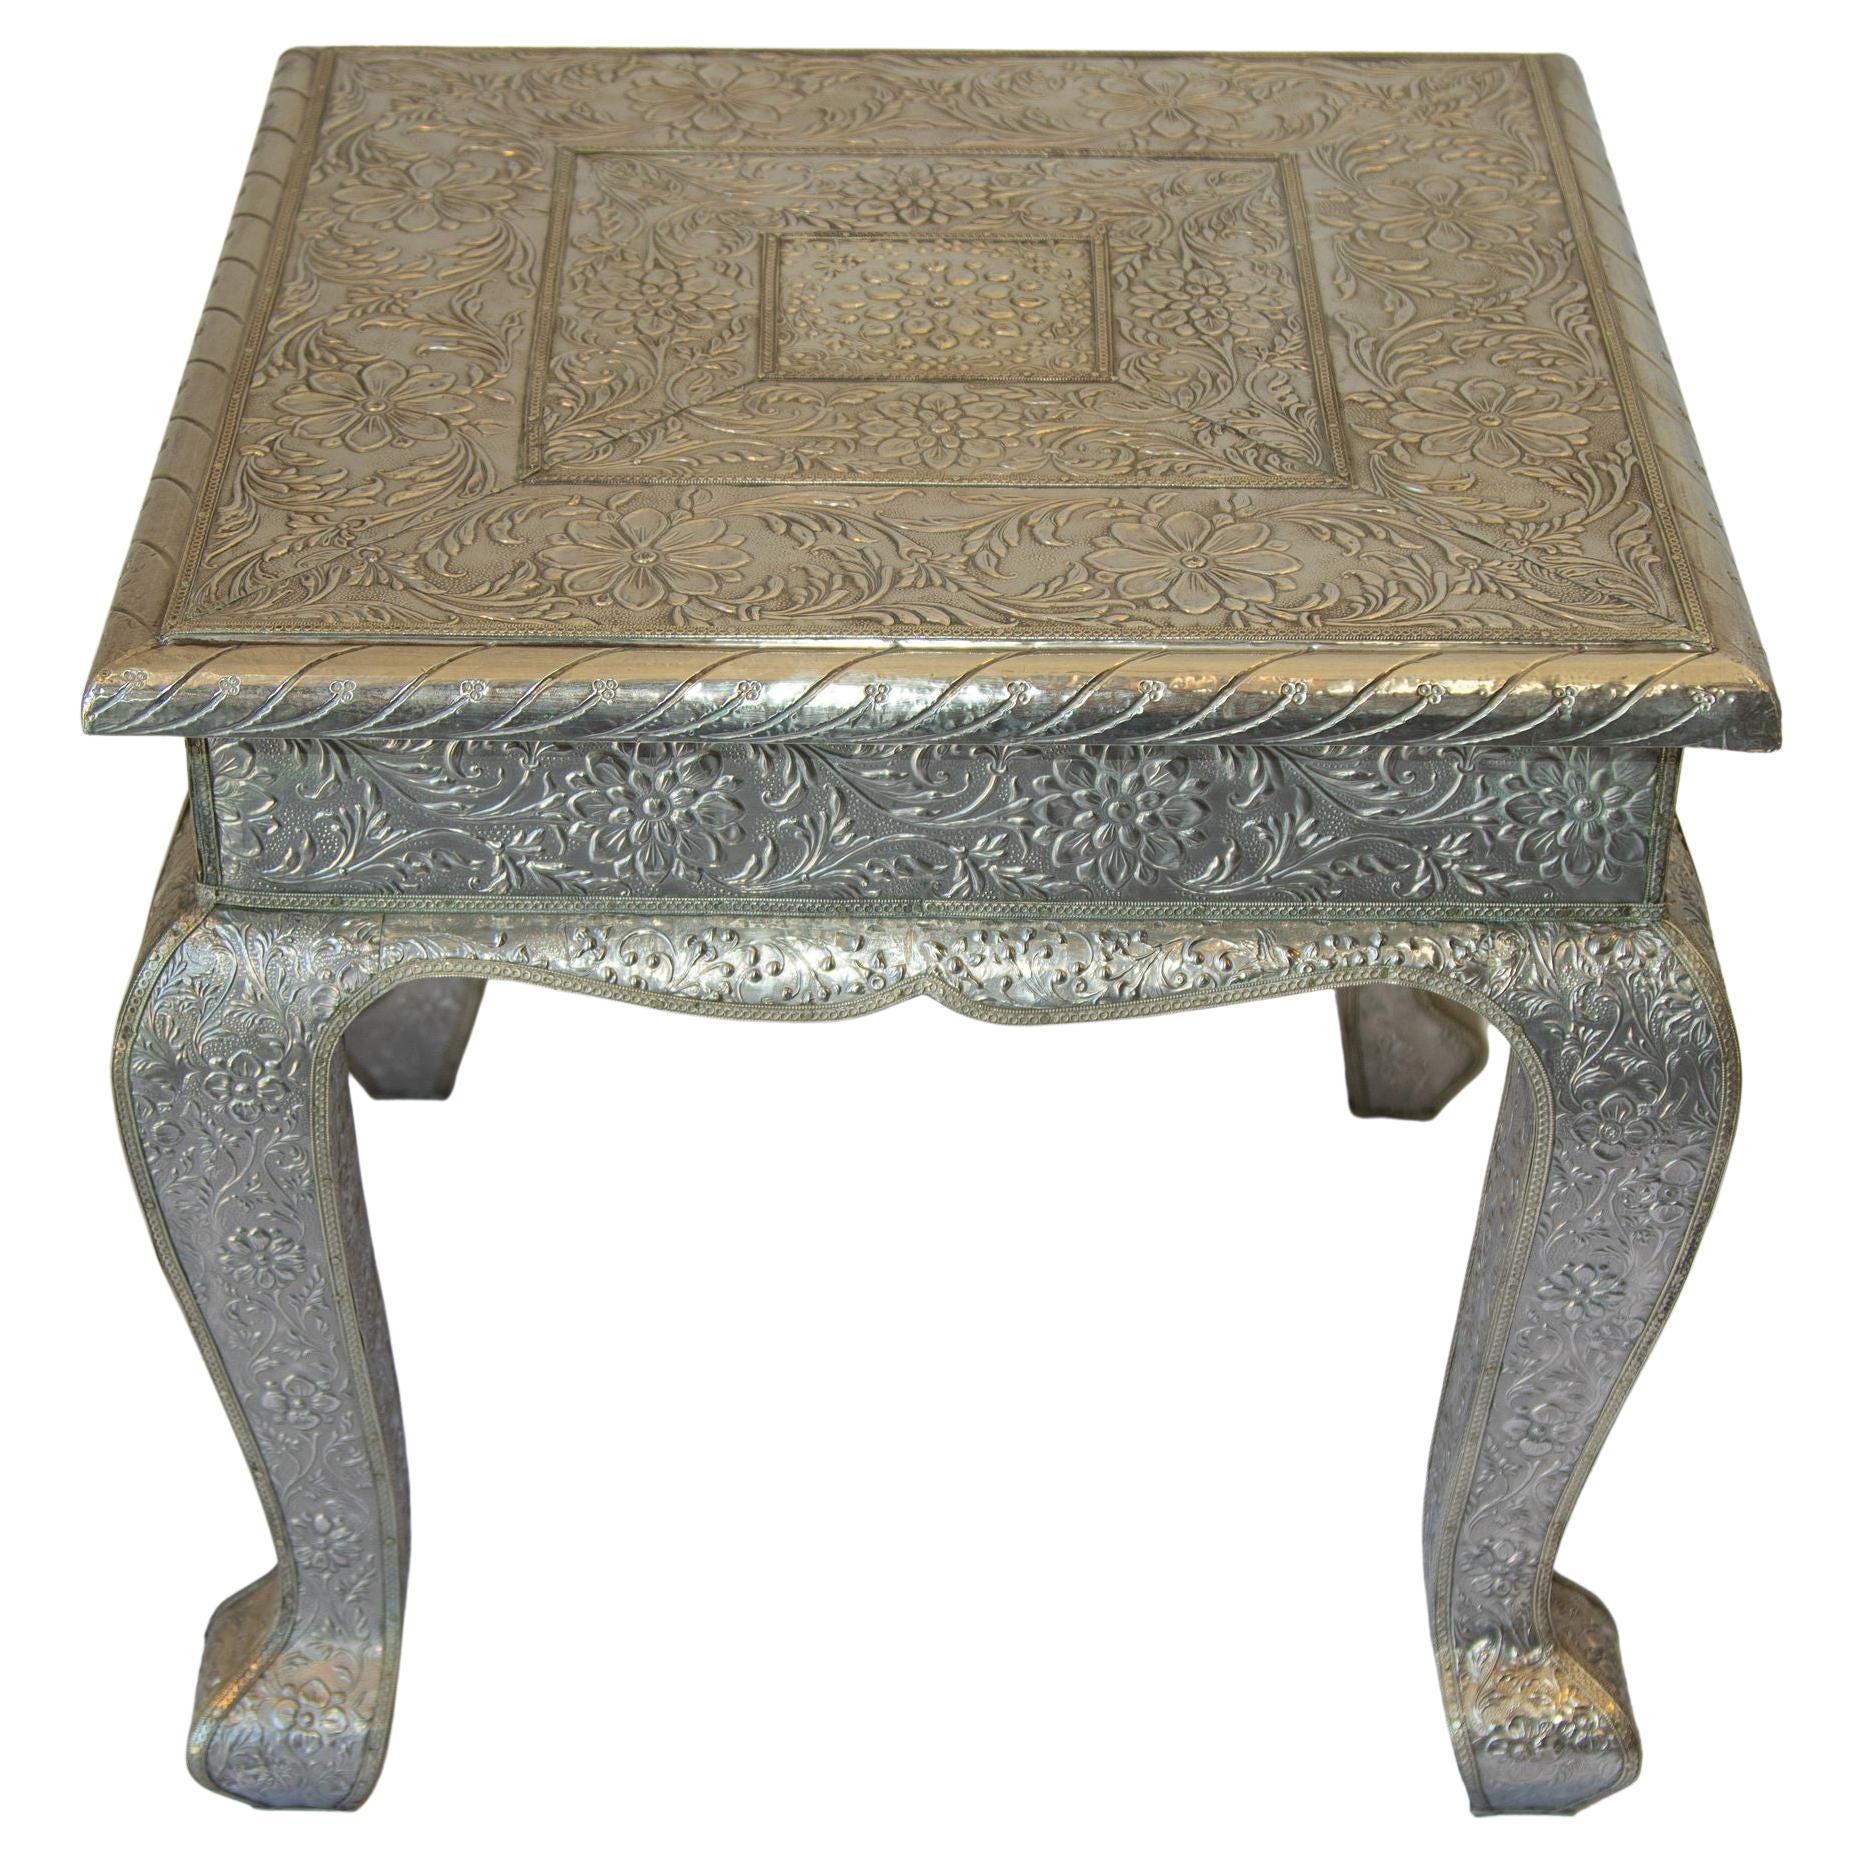 1950 Anglo-Indian Silver Wrapped Clad Side Low Table For Sale